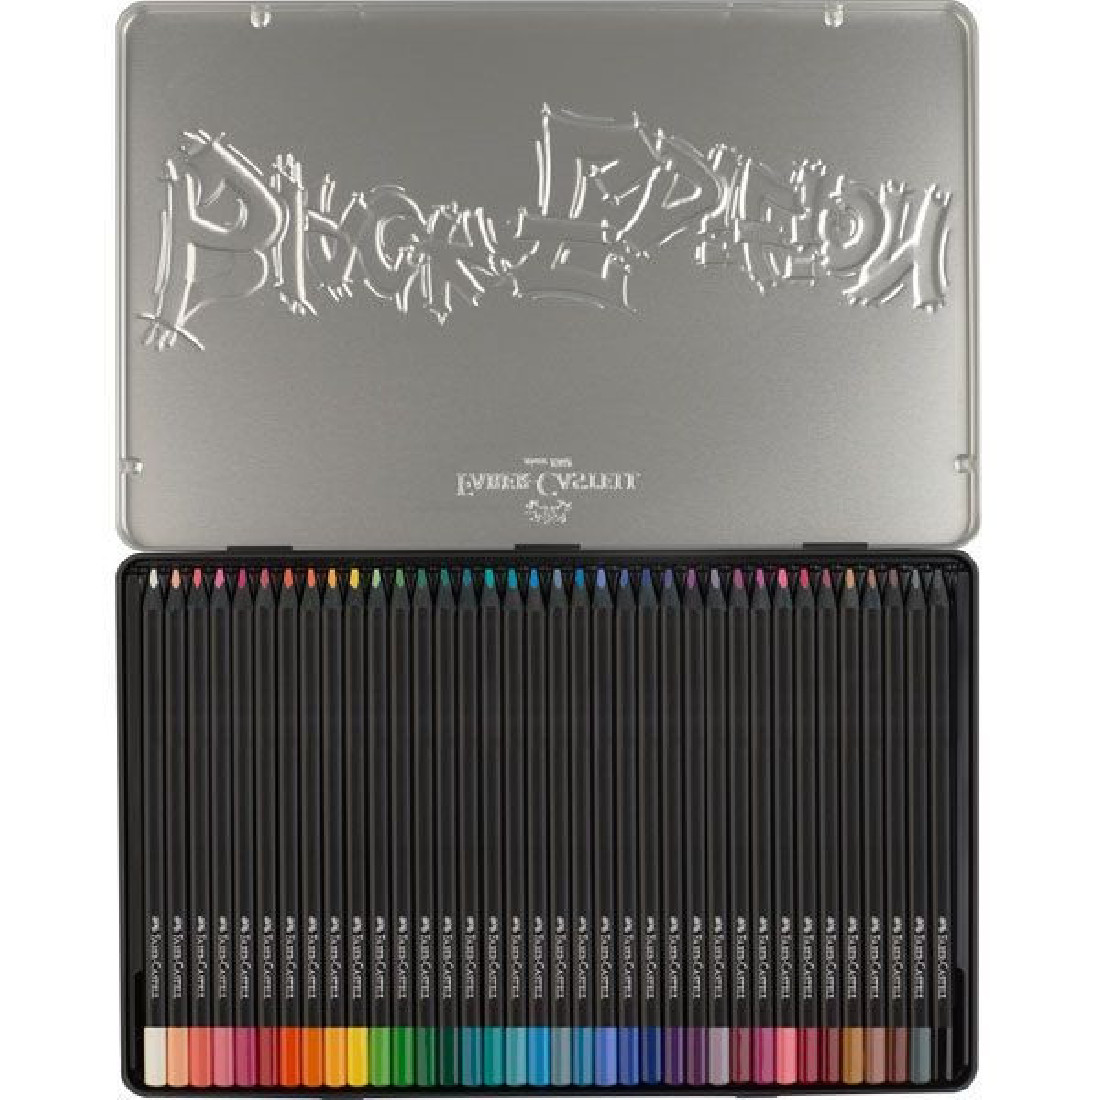 Faber Castell Black Edition 36 Colouring Pencils, Shatterproof, for Children and Adults 116437